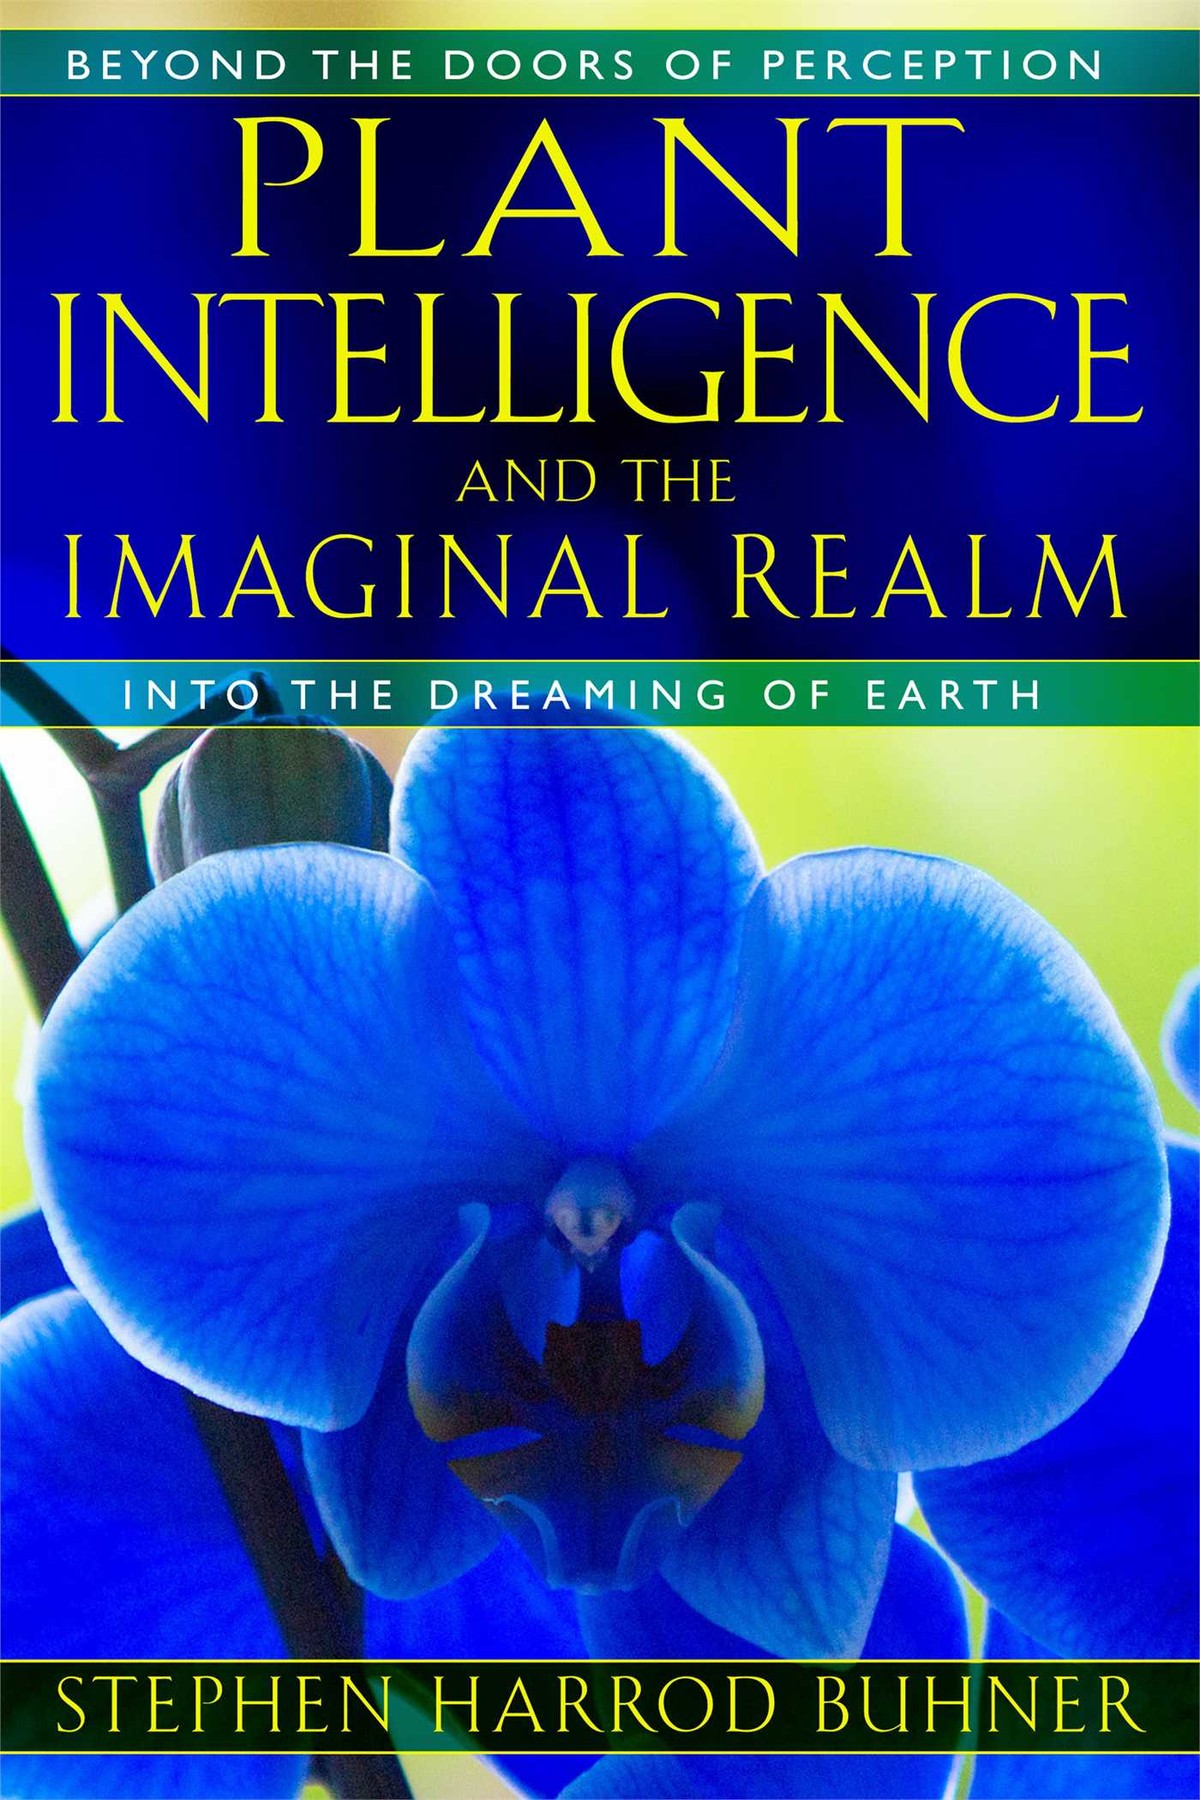 Stephen Harrod Buhner, Plant Intelligence and the Imaginal Realm: Beyond the Doors of Perception into the Dreaming of Earth (2014)